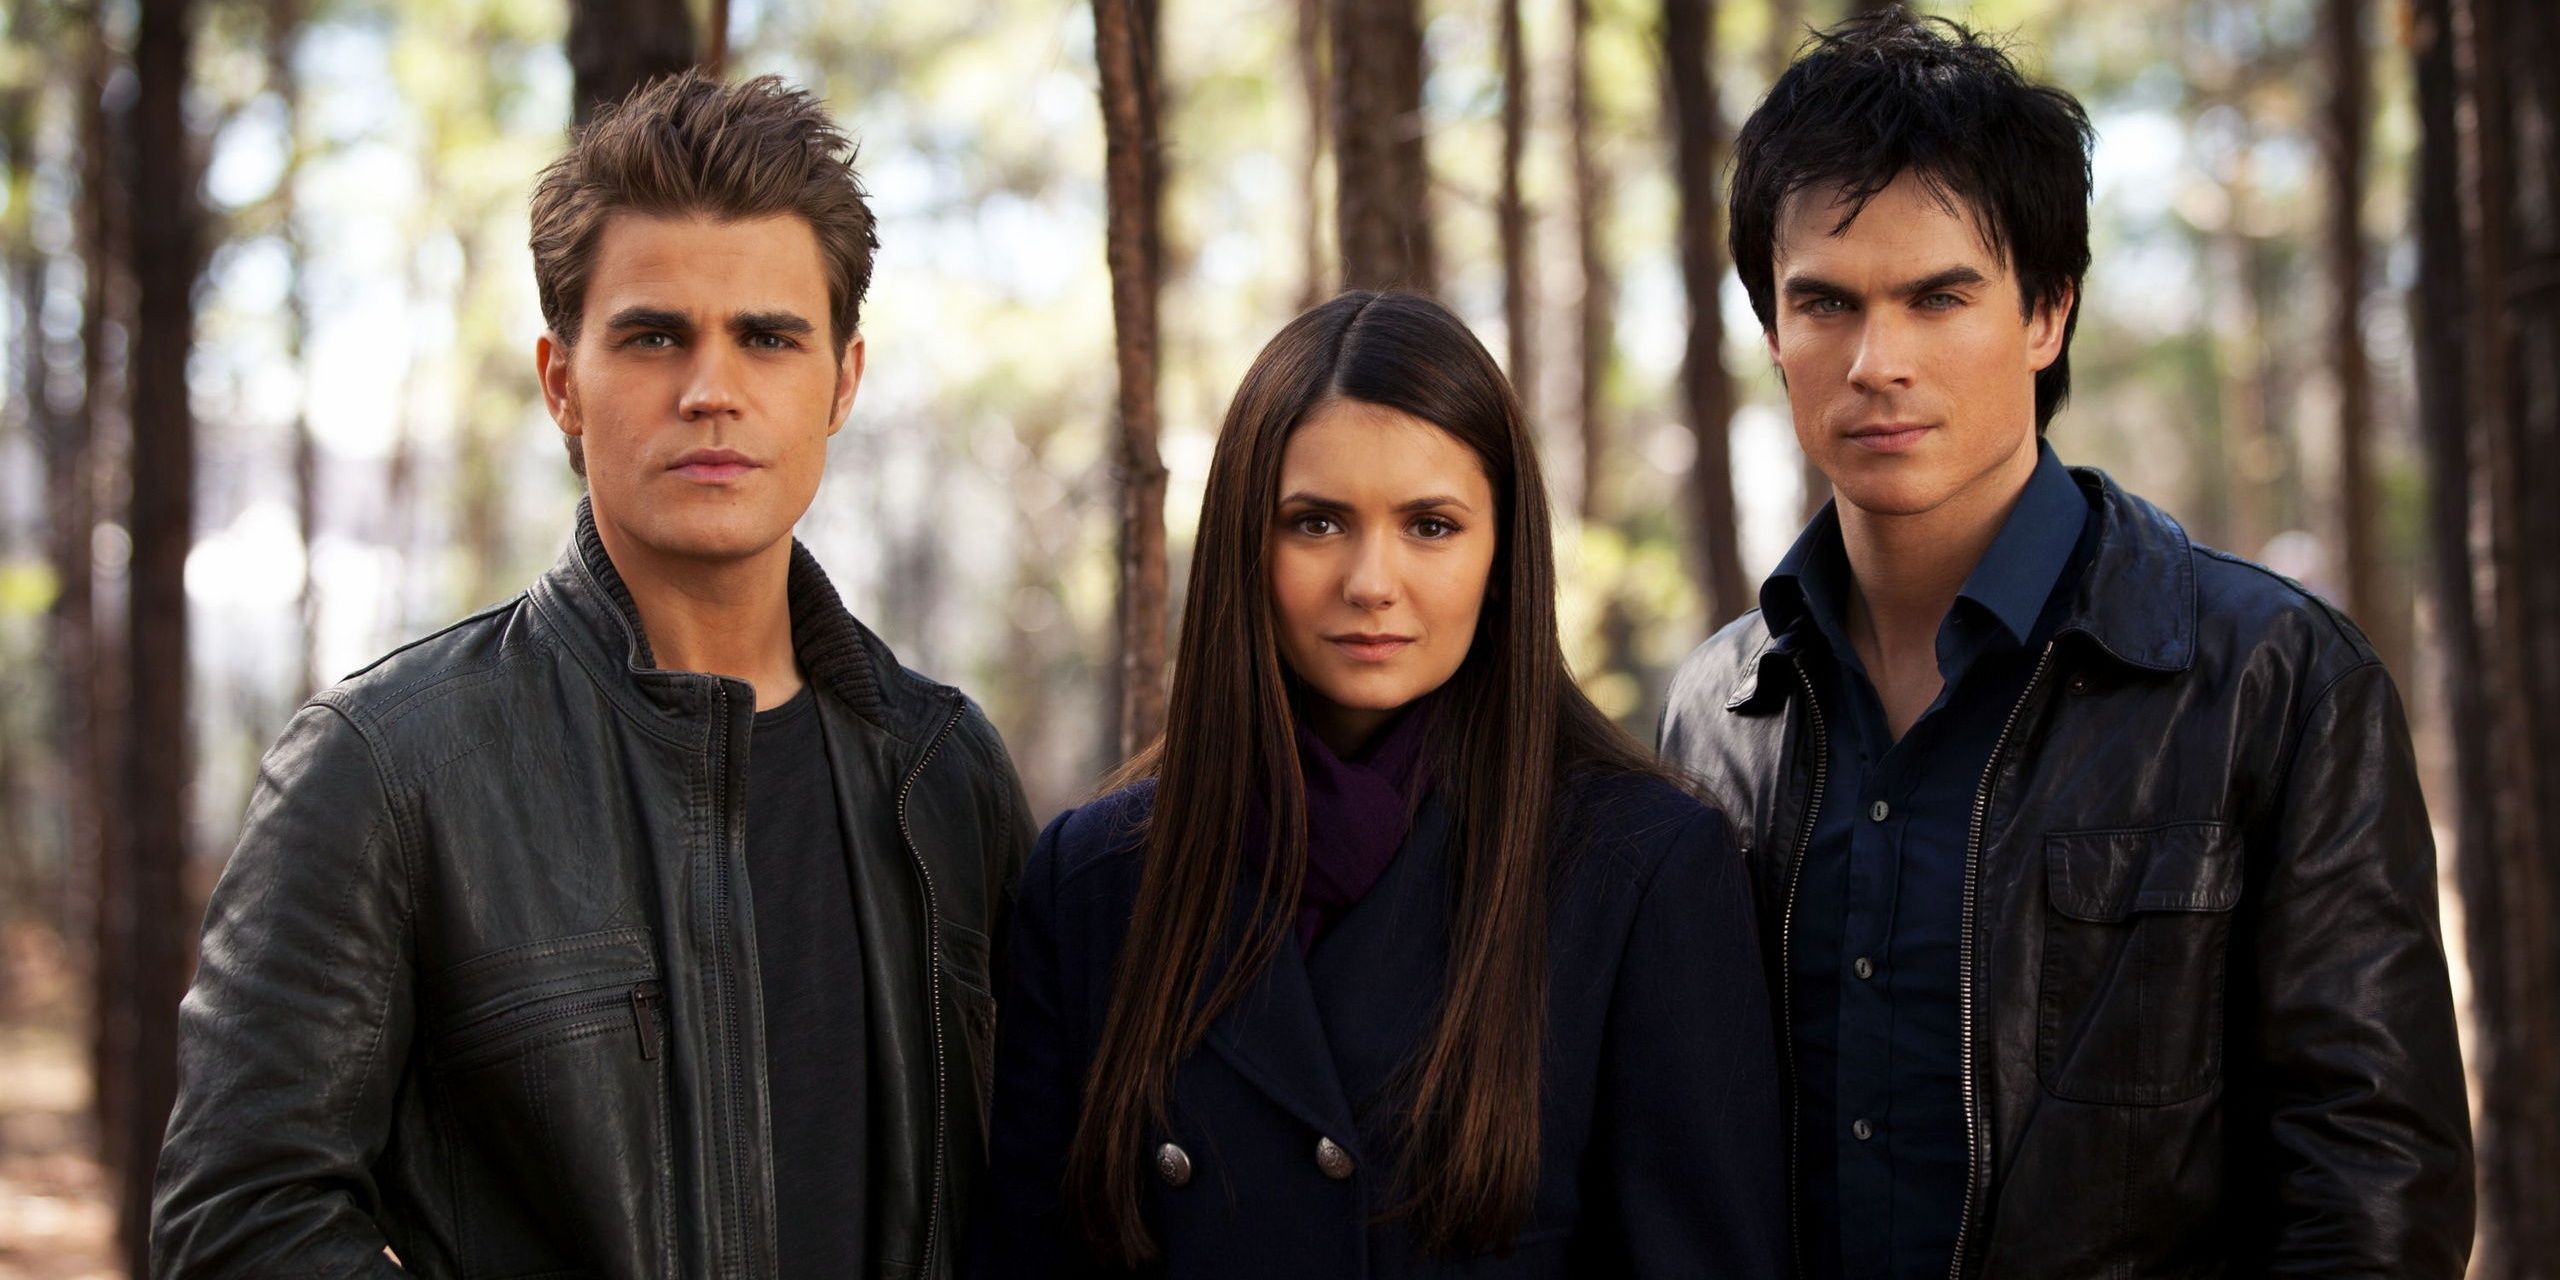 An image of Damon, Elena, and Stefan standing together in The Vampire Diaries 